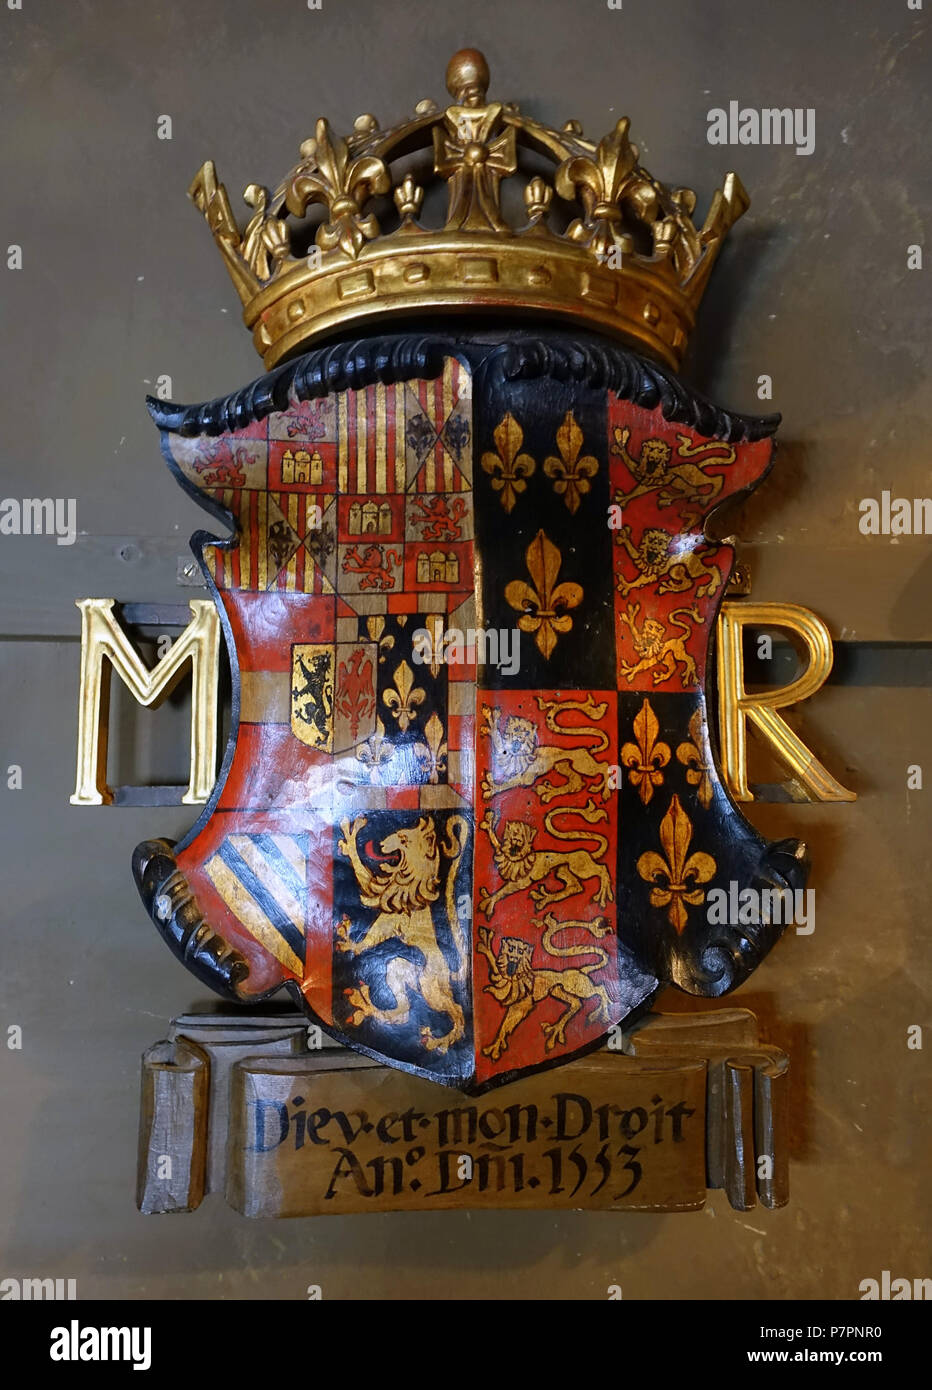 English: Exhibit in Snowshill Manor - Gloucestershire, England. All items in this photograph are old enough so that they are in the . 23 May 2016, 08:43:21 261 Mary I, 1553, Dieu et mon droit - Snowshill Manor - Gloucestershire, England - DSC09603 Stock Photo